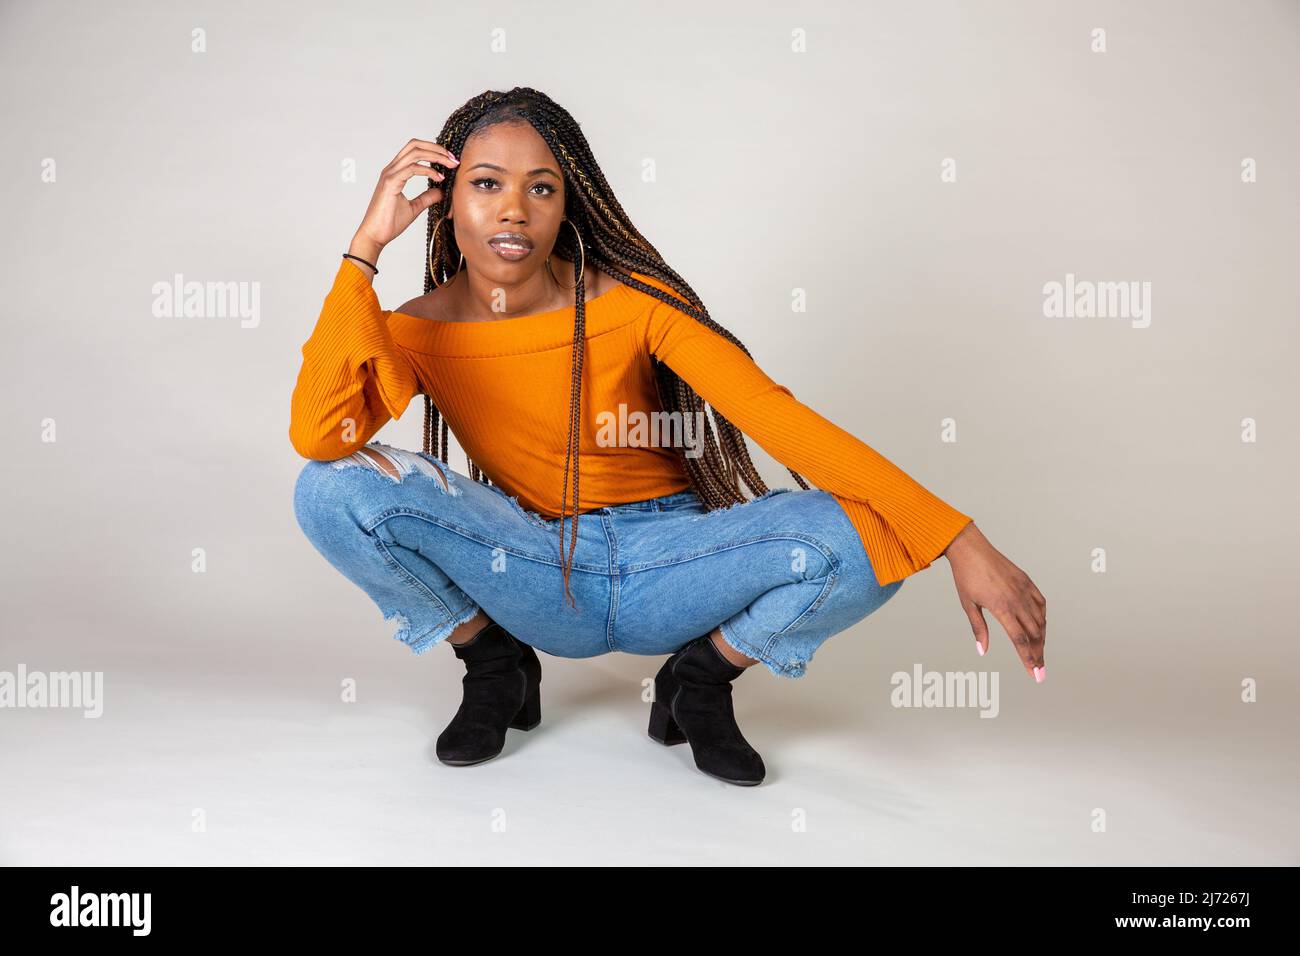 Studio shot of a young Black woman with vintage orange top and baggy jeans  posing on a white background squatting Stock Photo - Alamy